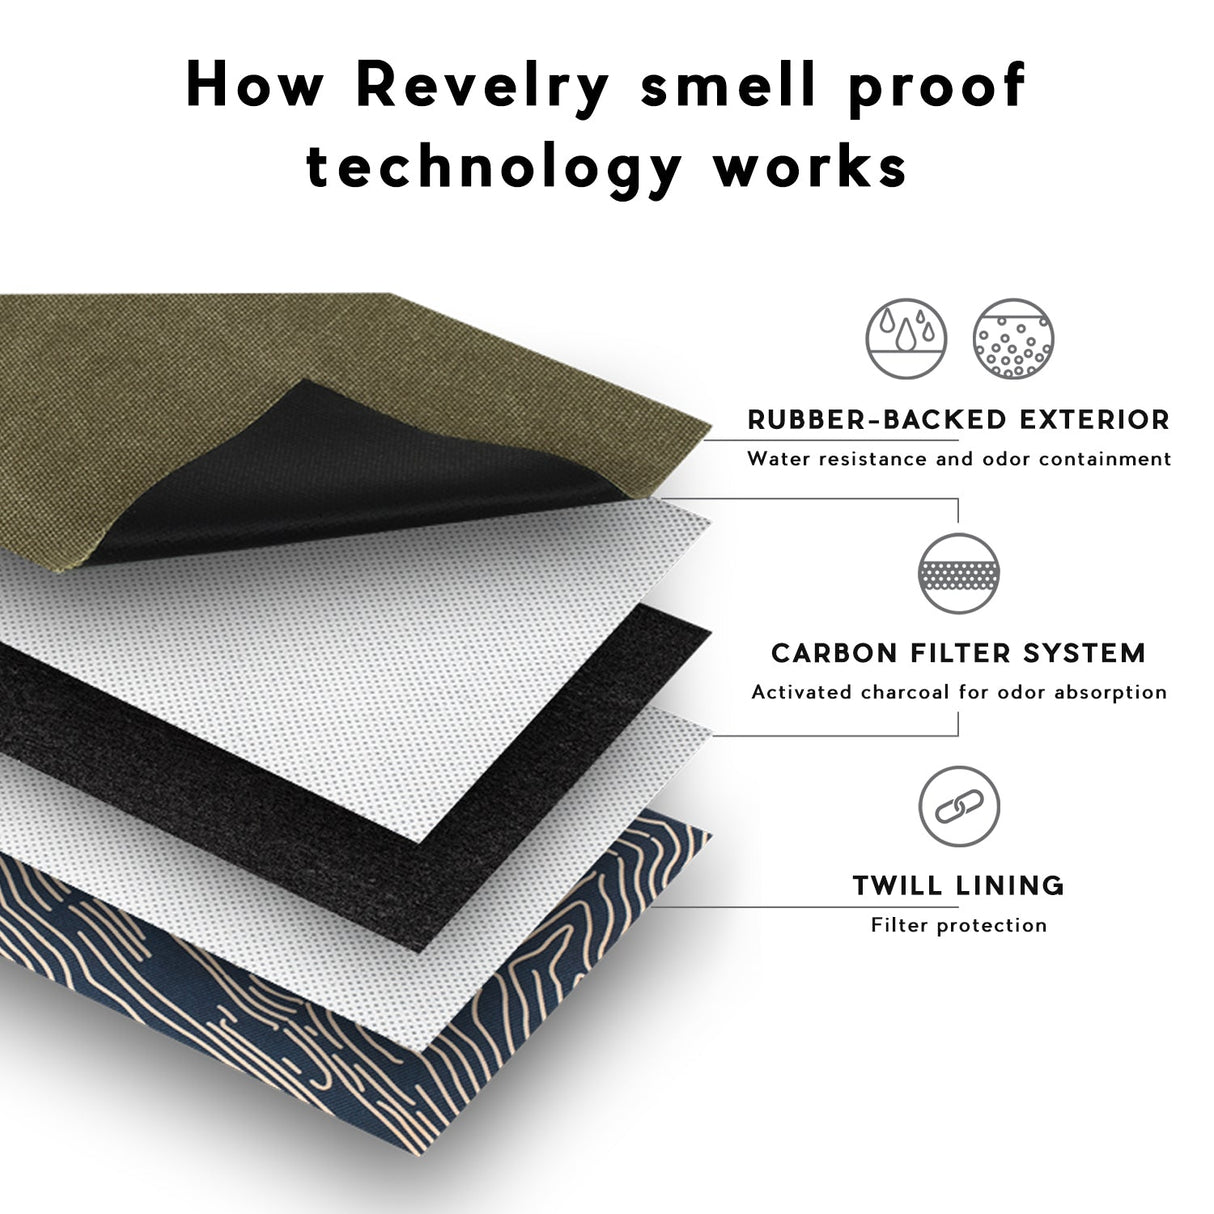 Revelry Supply 'The Gordito' smell proof pouch materials close-up with carbon filter system